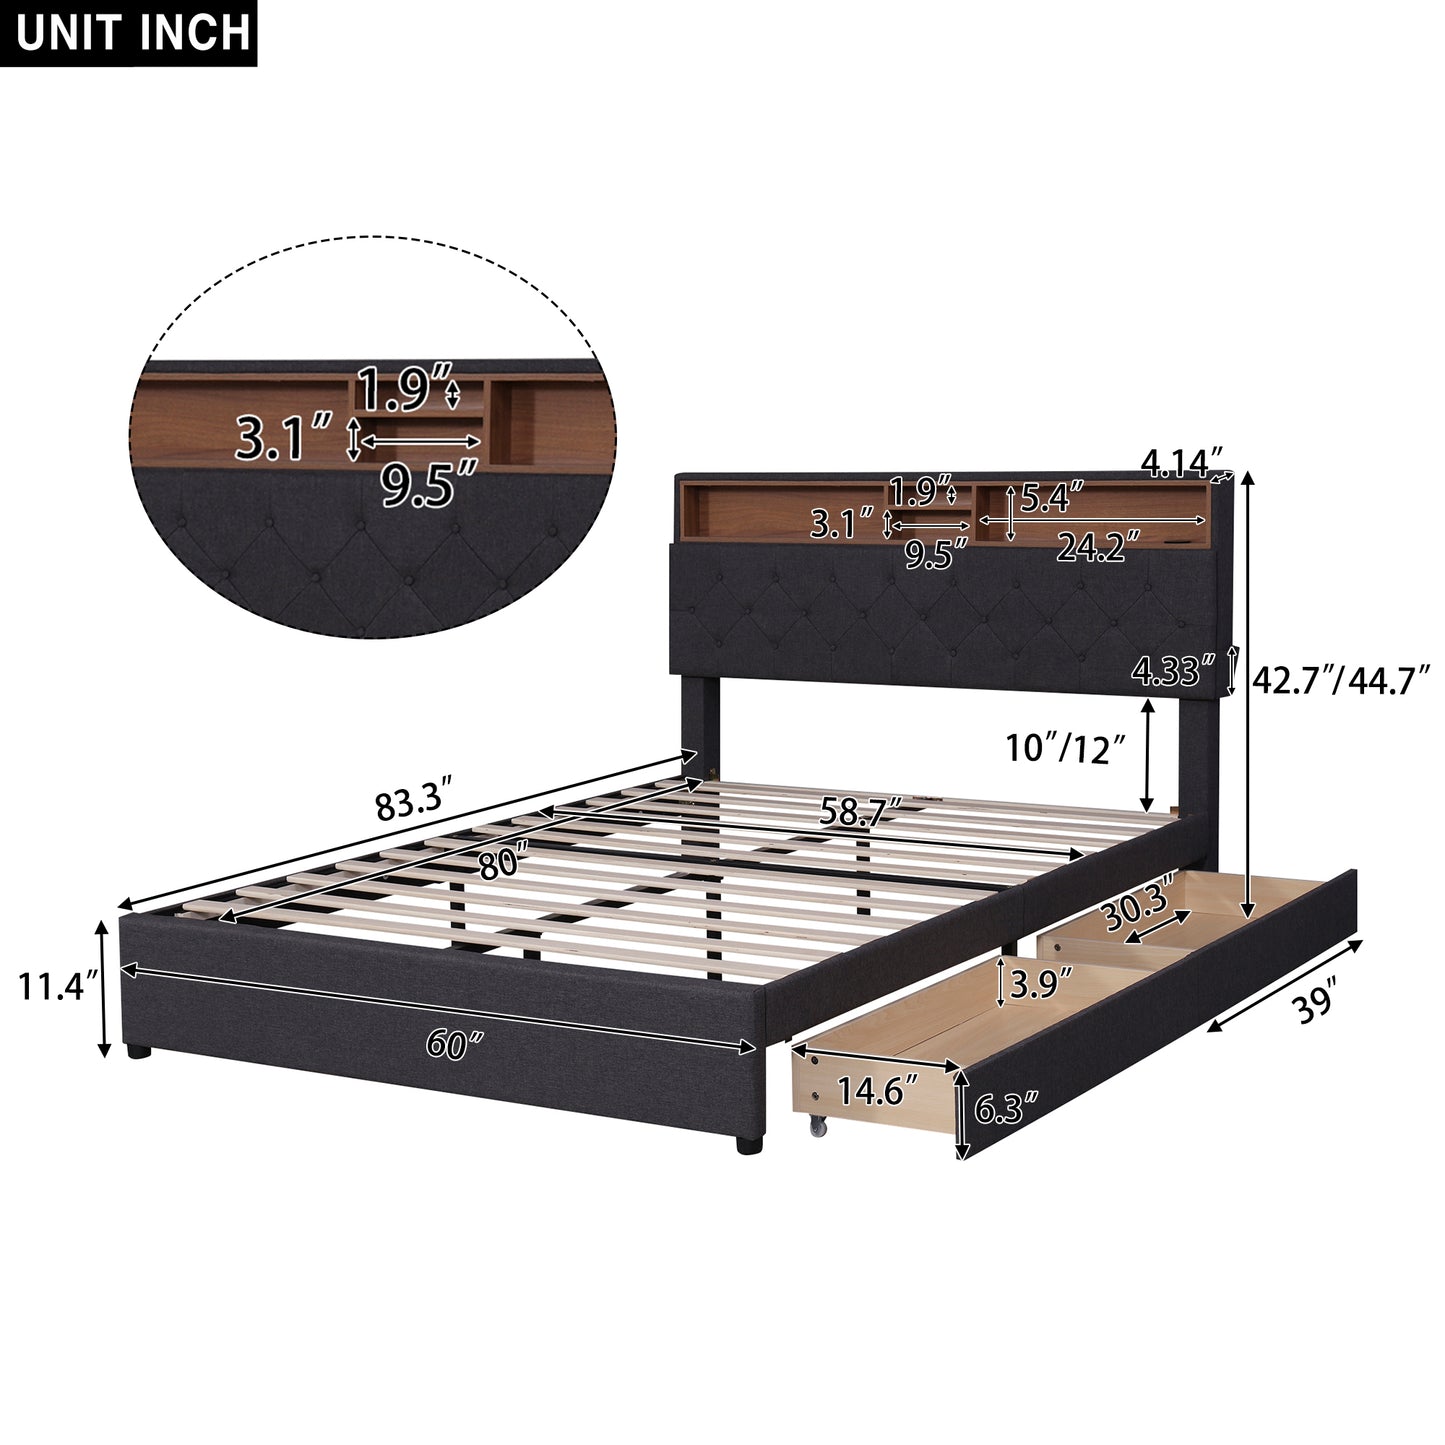 Queen Size Upholstered Platform Bed with Storage Headboard, LED, USB Charging and 2 Drawers, Dark Gray